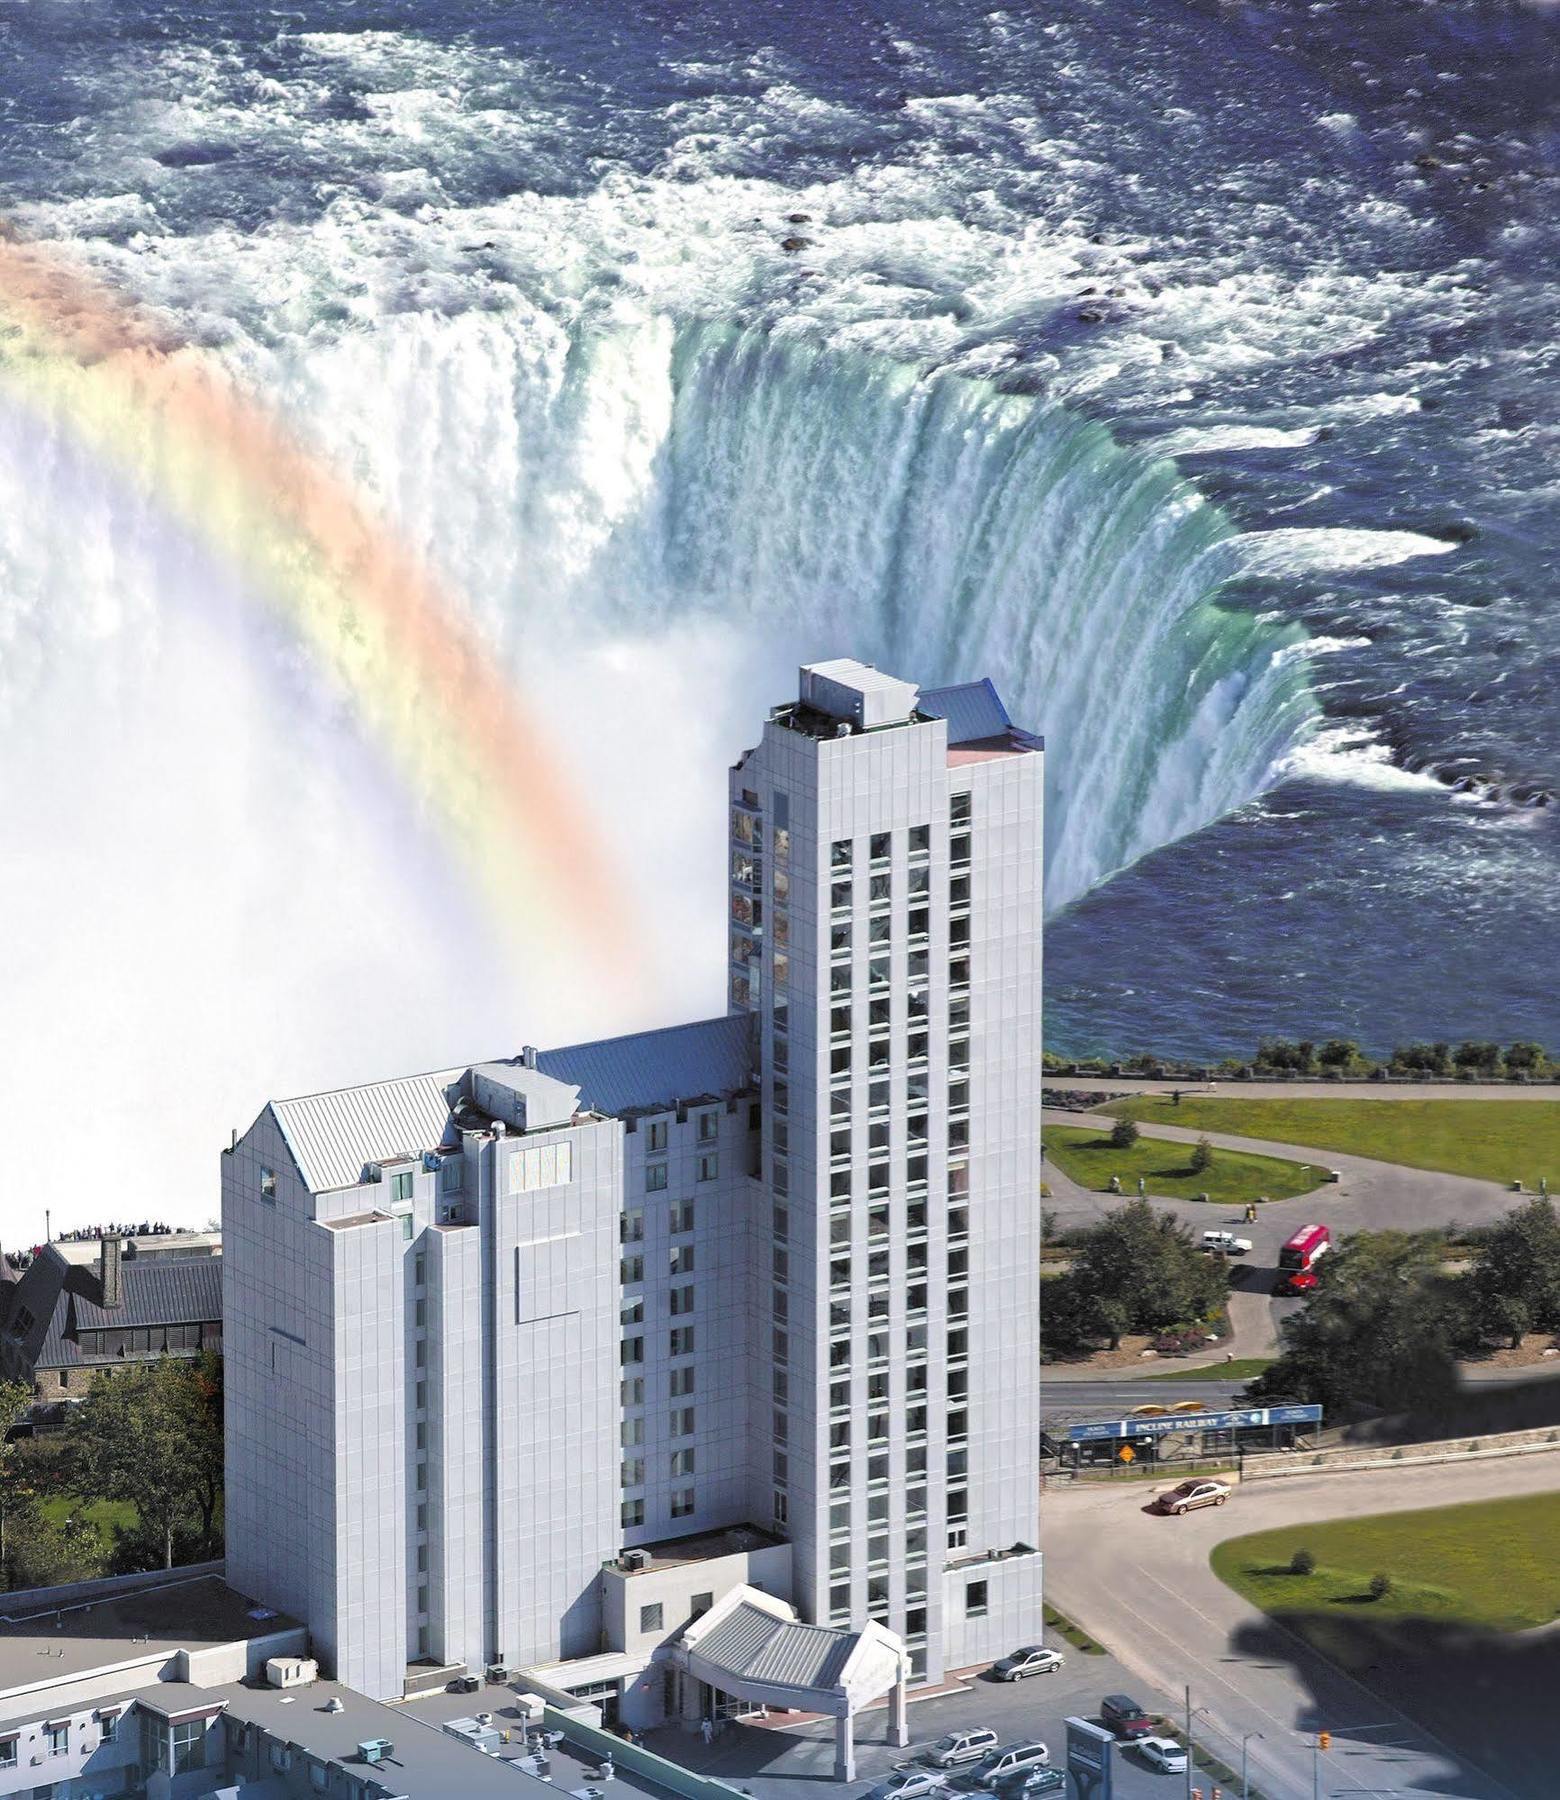 The Oakes Hotel Overlooking The Falls Niagara-Fälle Exterior foto